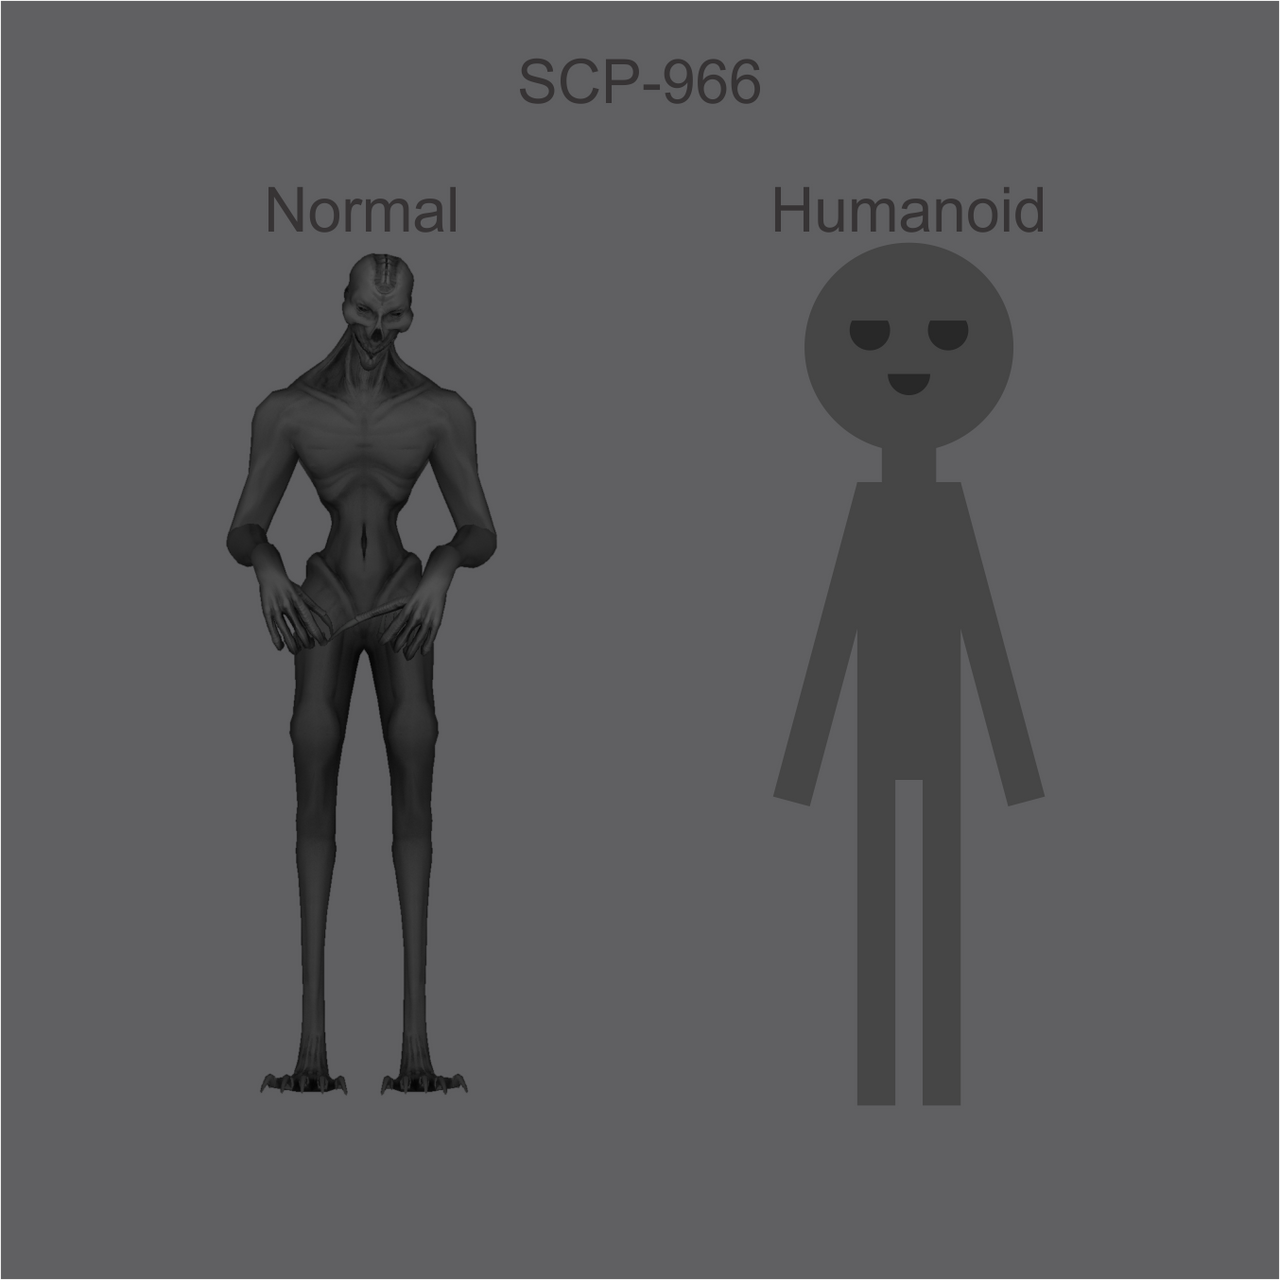 SCP-966 Normal and Humanoid Form by jordanli04 on DeviantArt